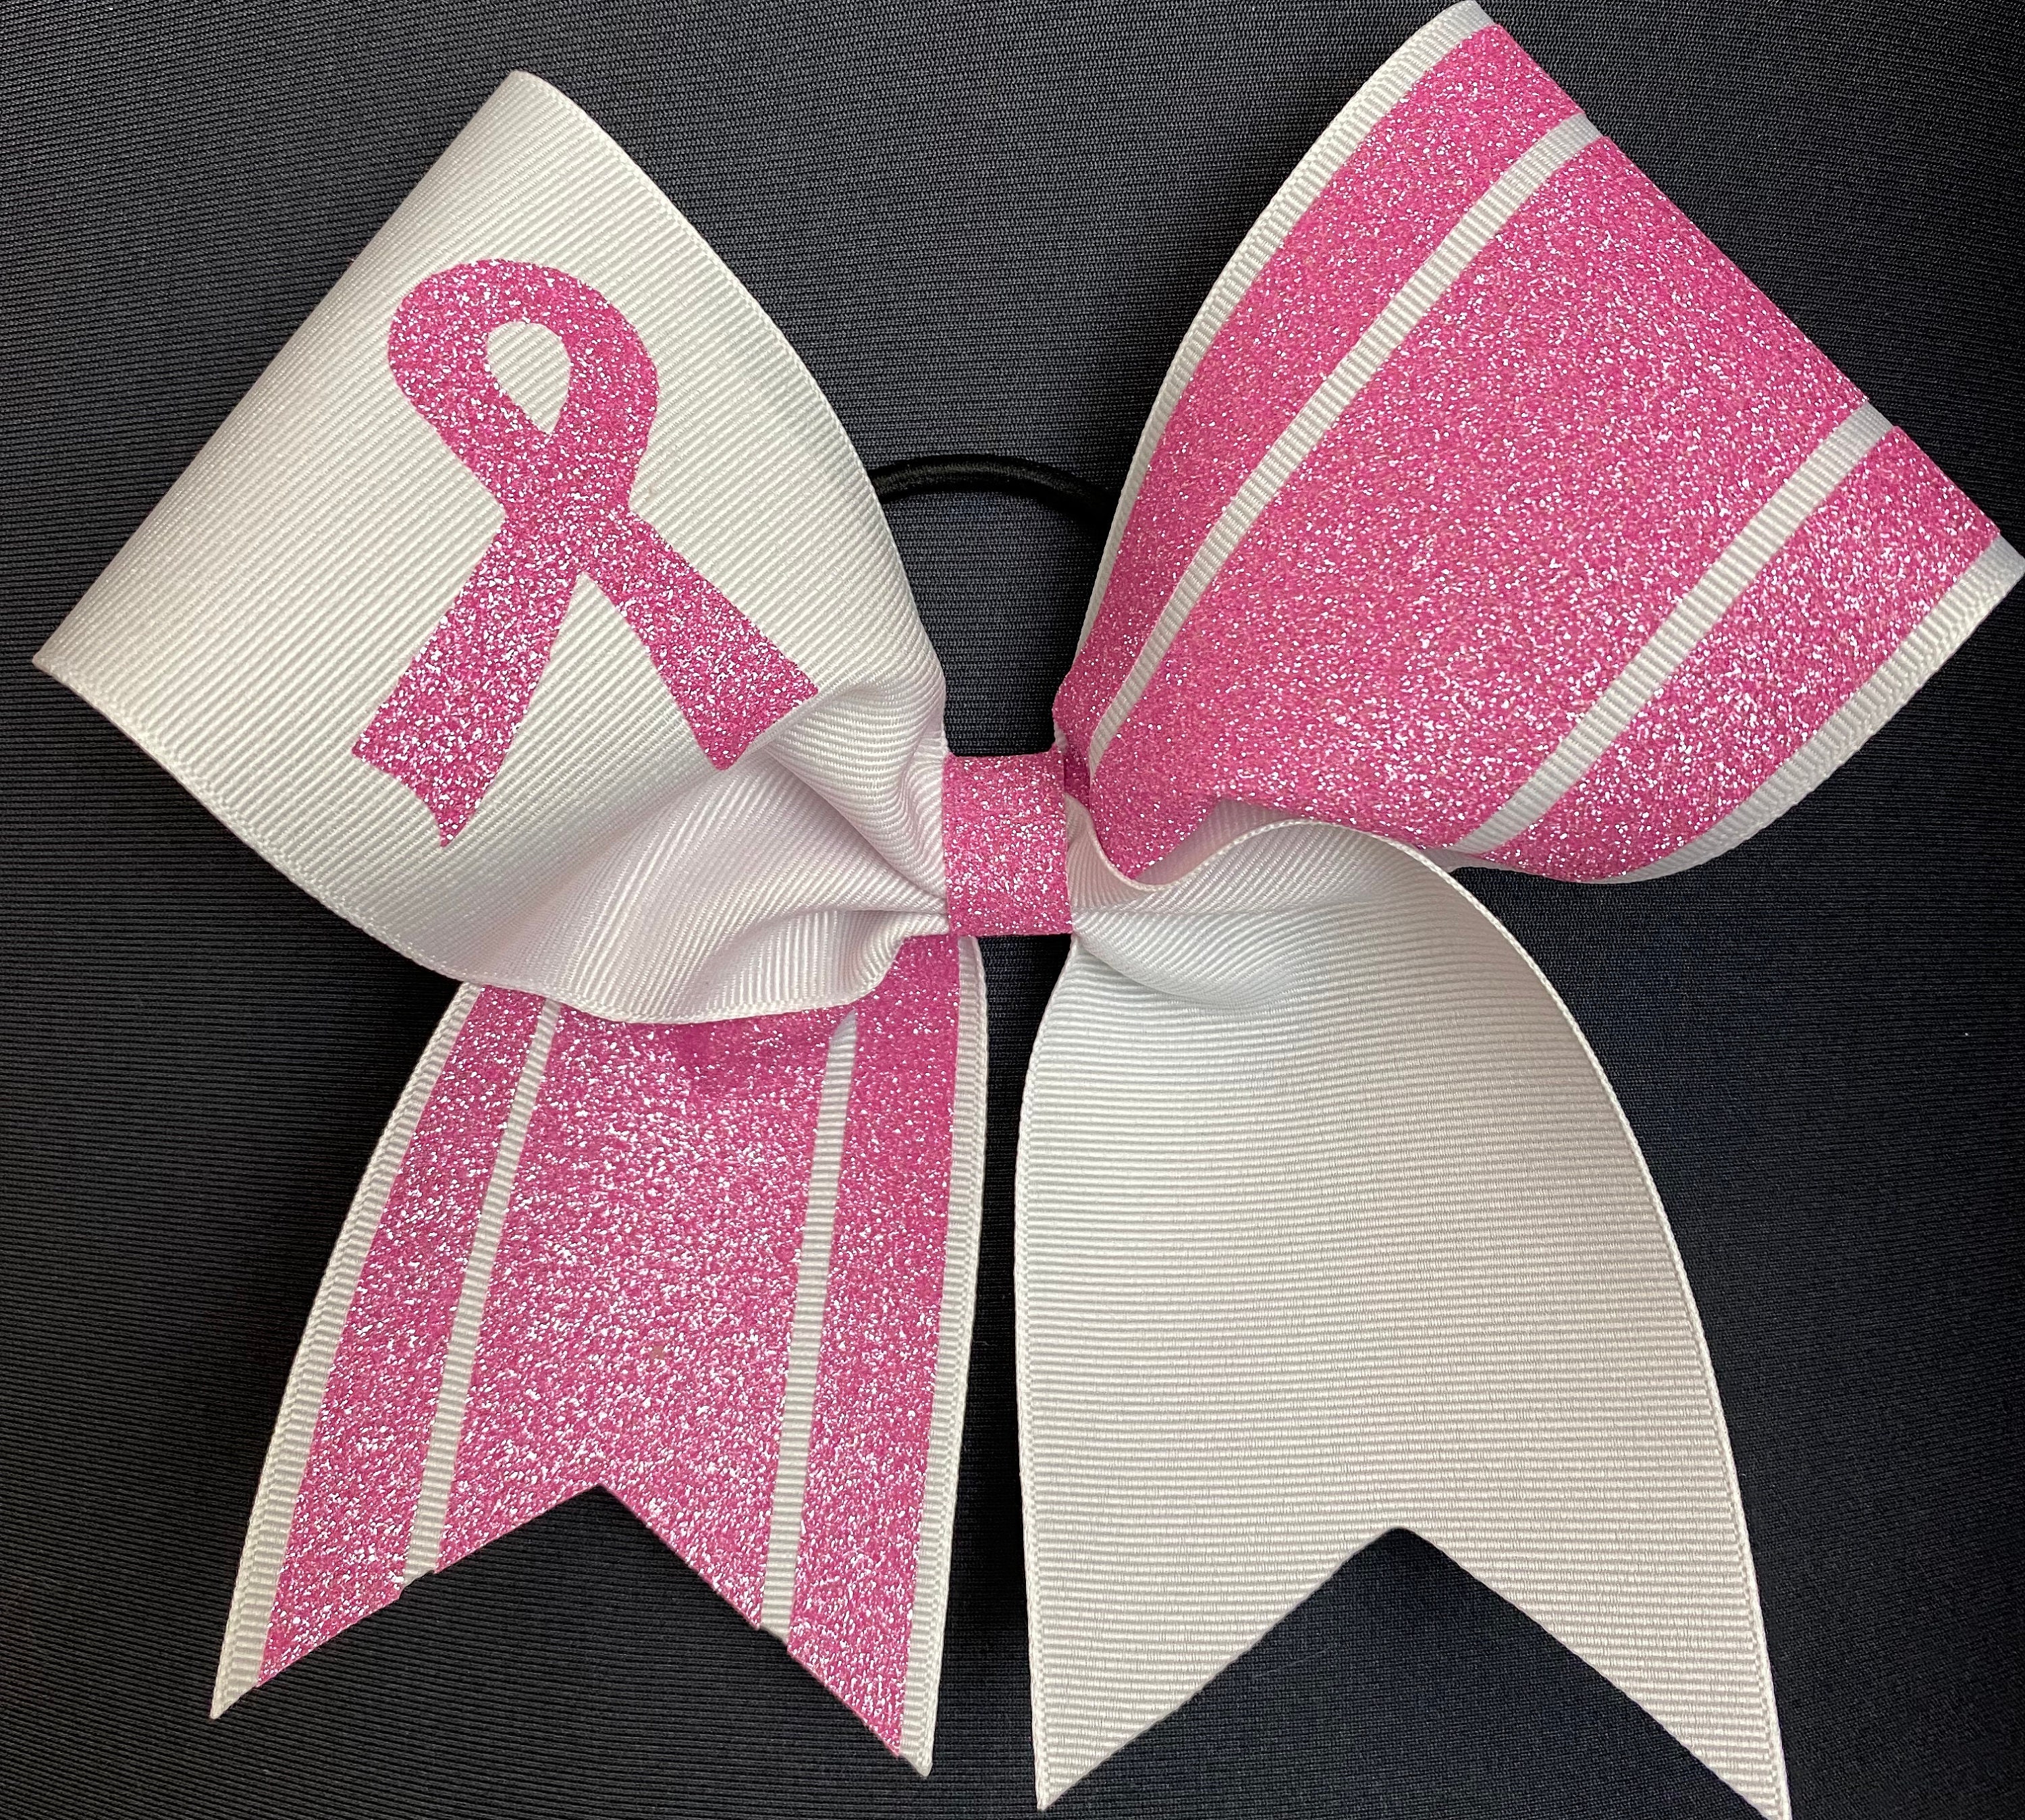 Breast Cancer Awareness Cheer Bows Team Cheer Bows Awareness Cheer Bows  Pink Cheer Bows Pink Out Cheer Bows Pink Cheer Bow 